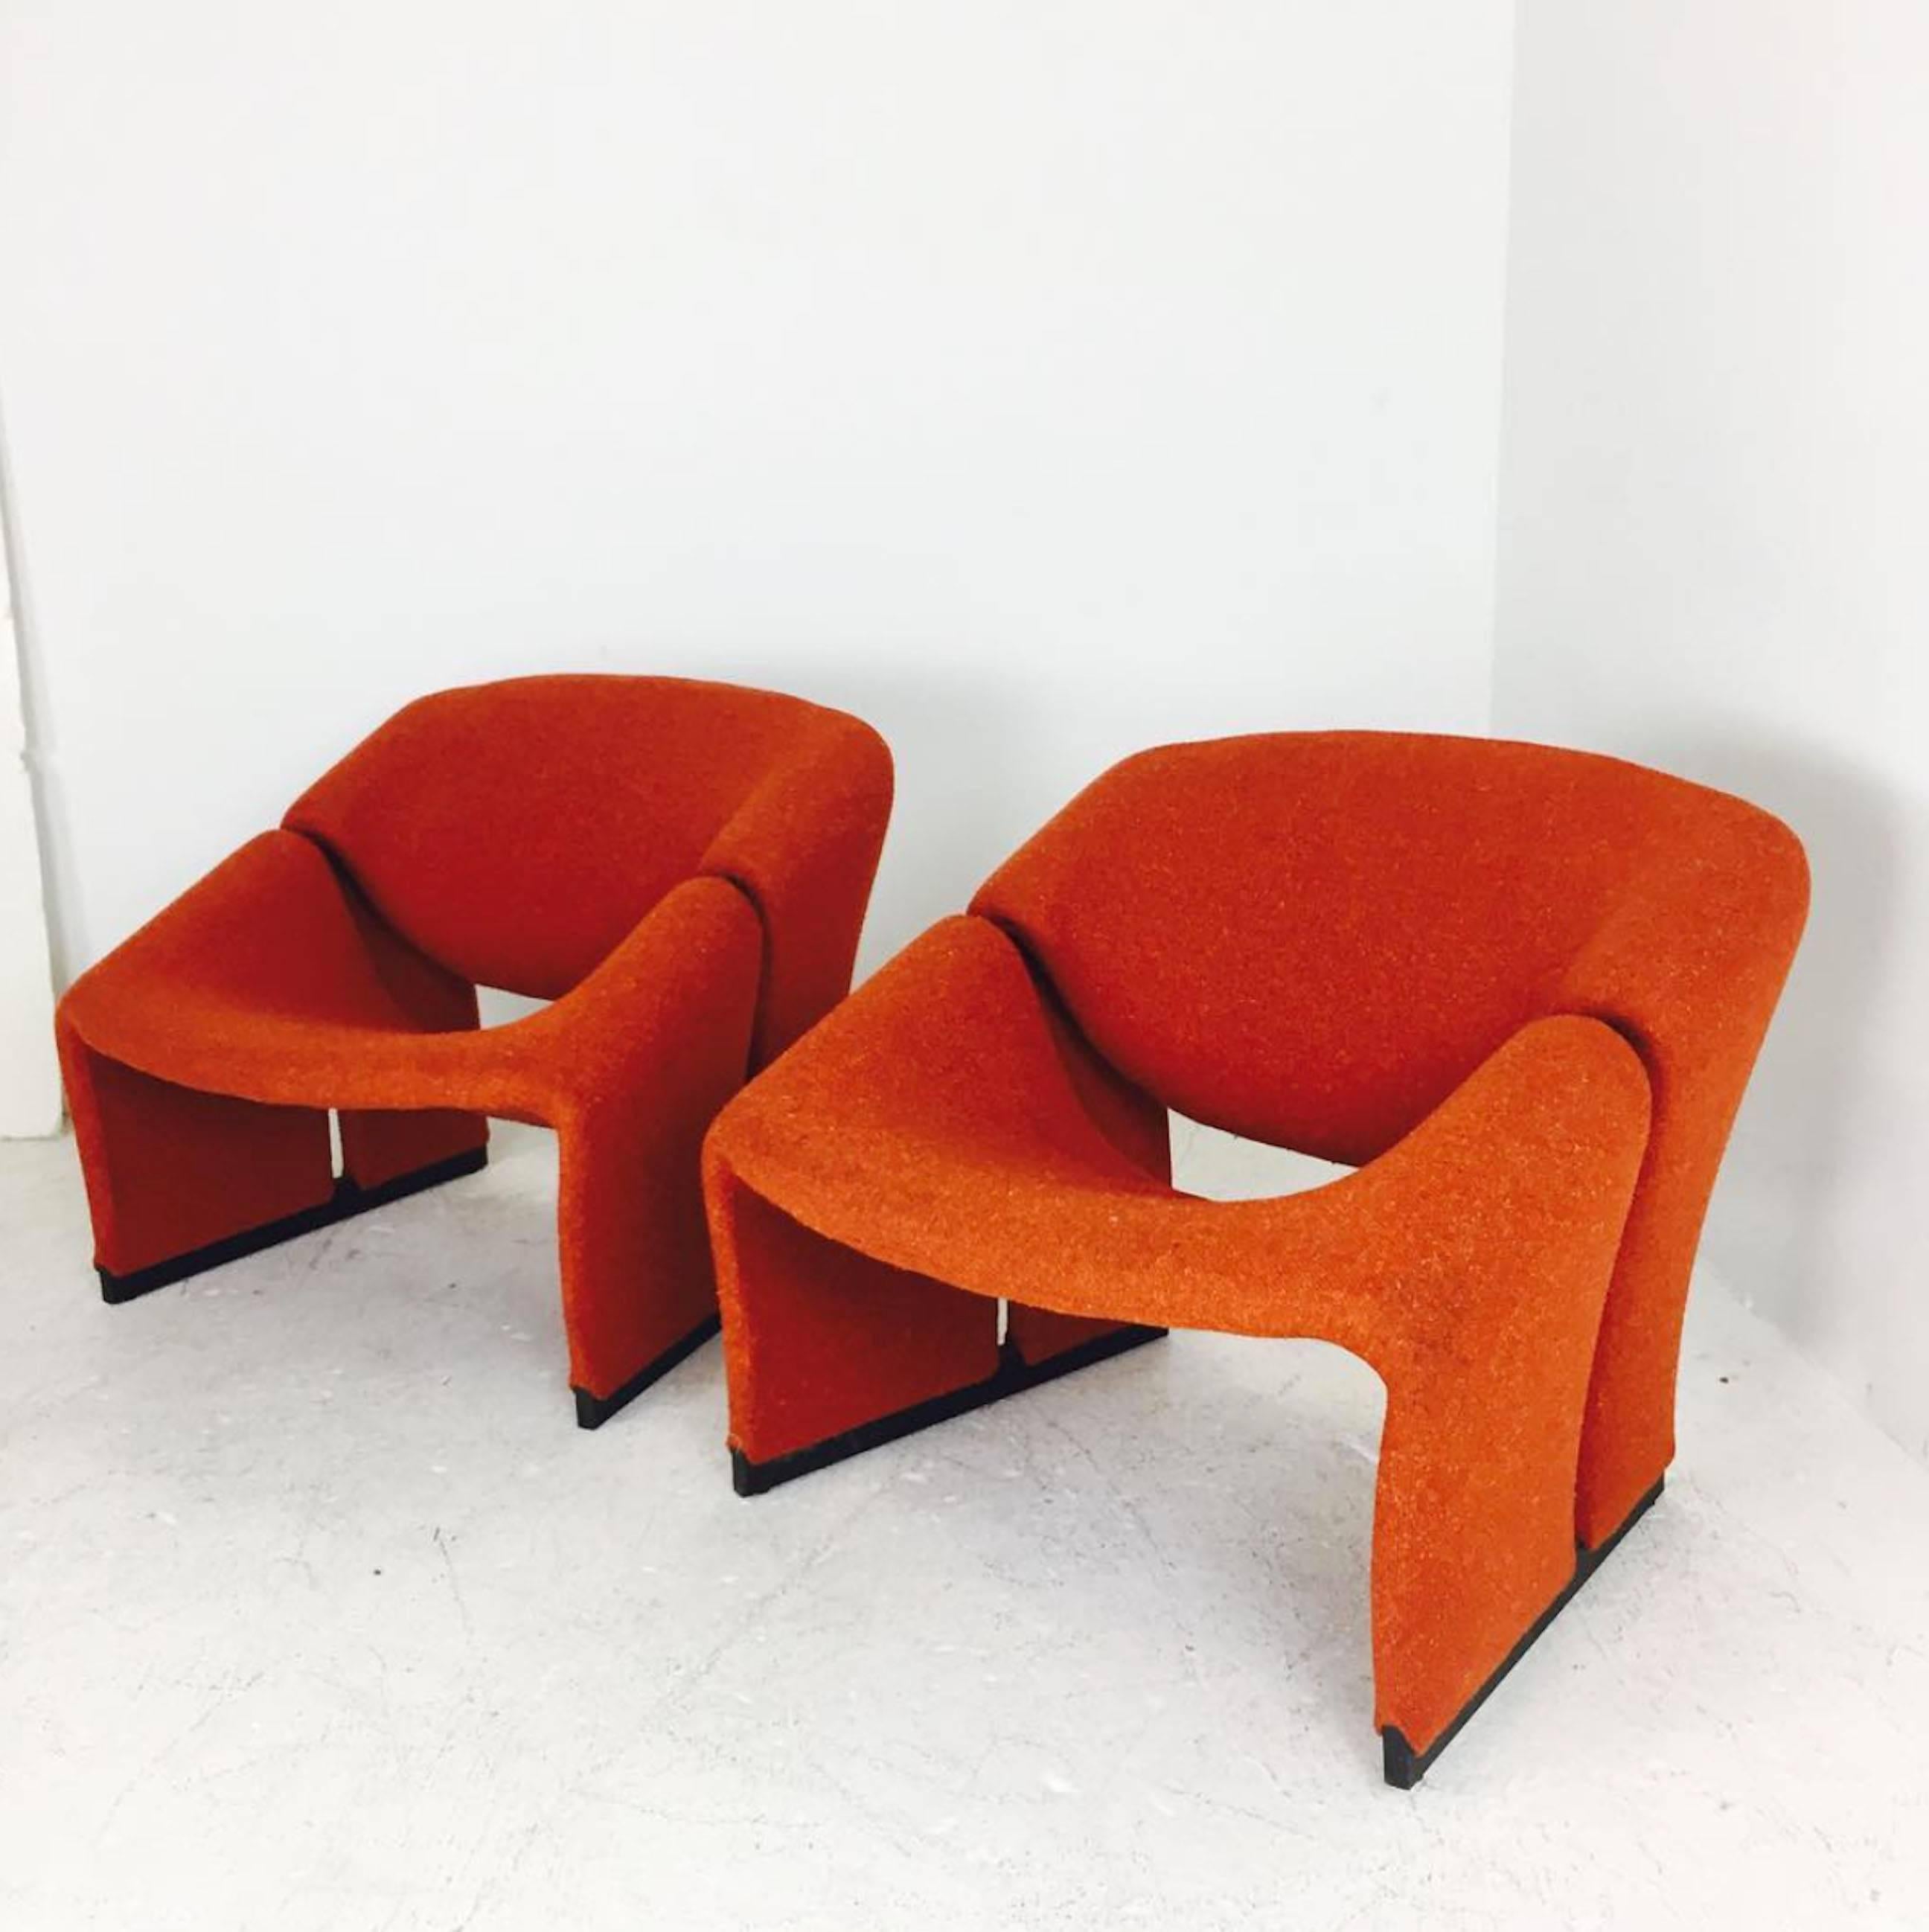 Pair of groovy chairs by Pierre Paulin for Artifort. Chairs are upholstered in original orange tweed, in good vintage condition, with minimal visible wear, circa 1970s.

Dimensions: 33